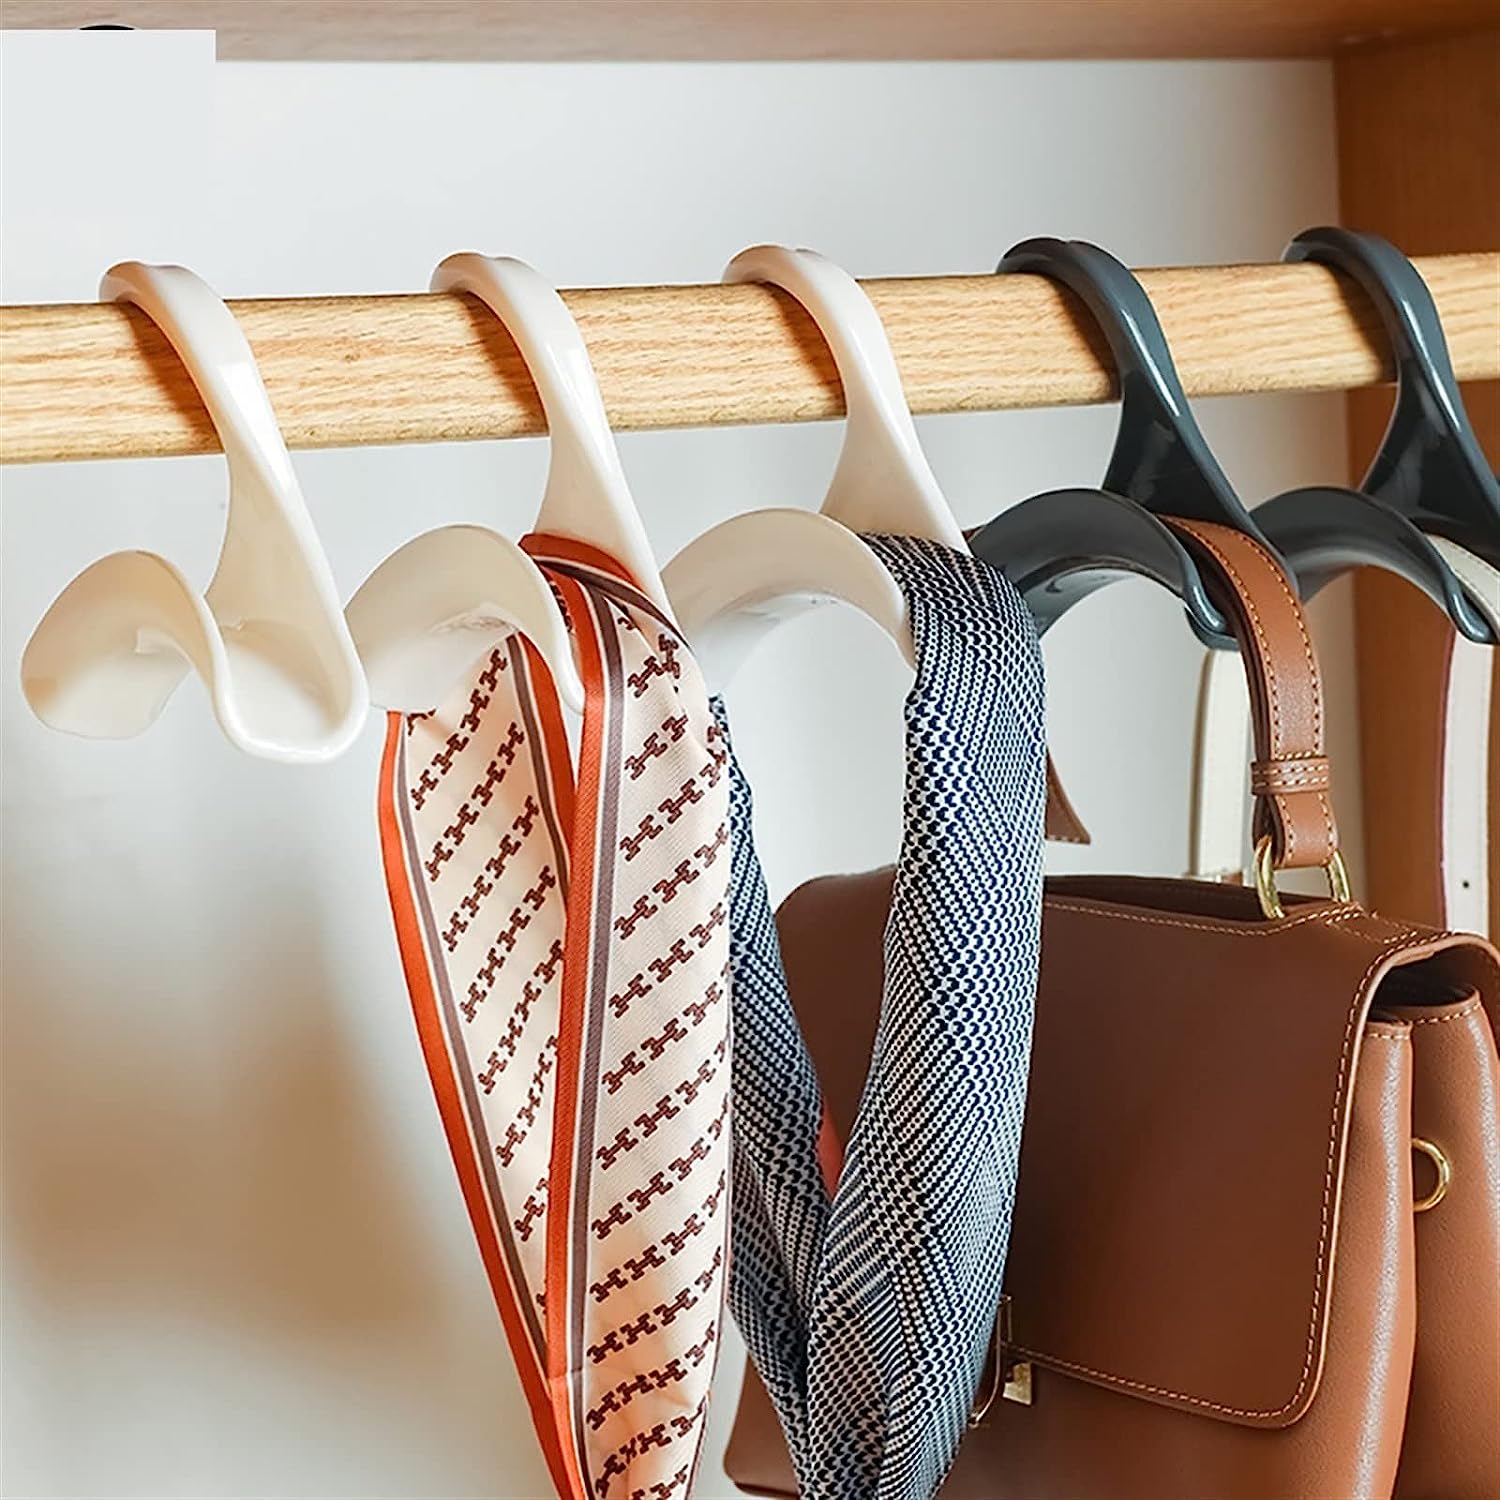 Efficiently organized rack showcasing various bags hung on specialized hanger hooks, ideal for saving space while organizing bags, belts, and scarves